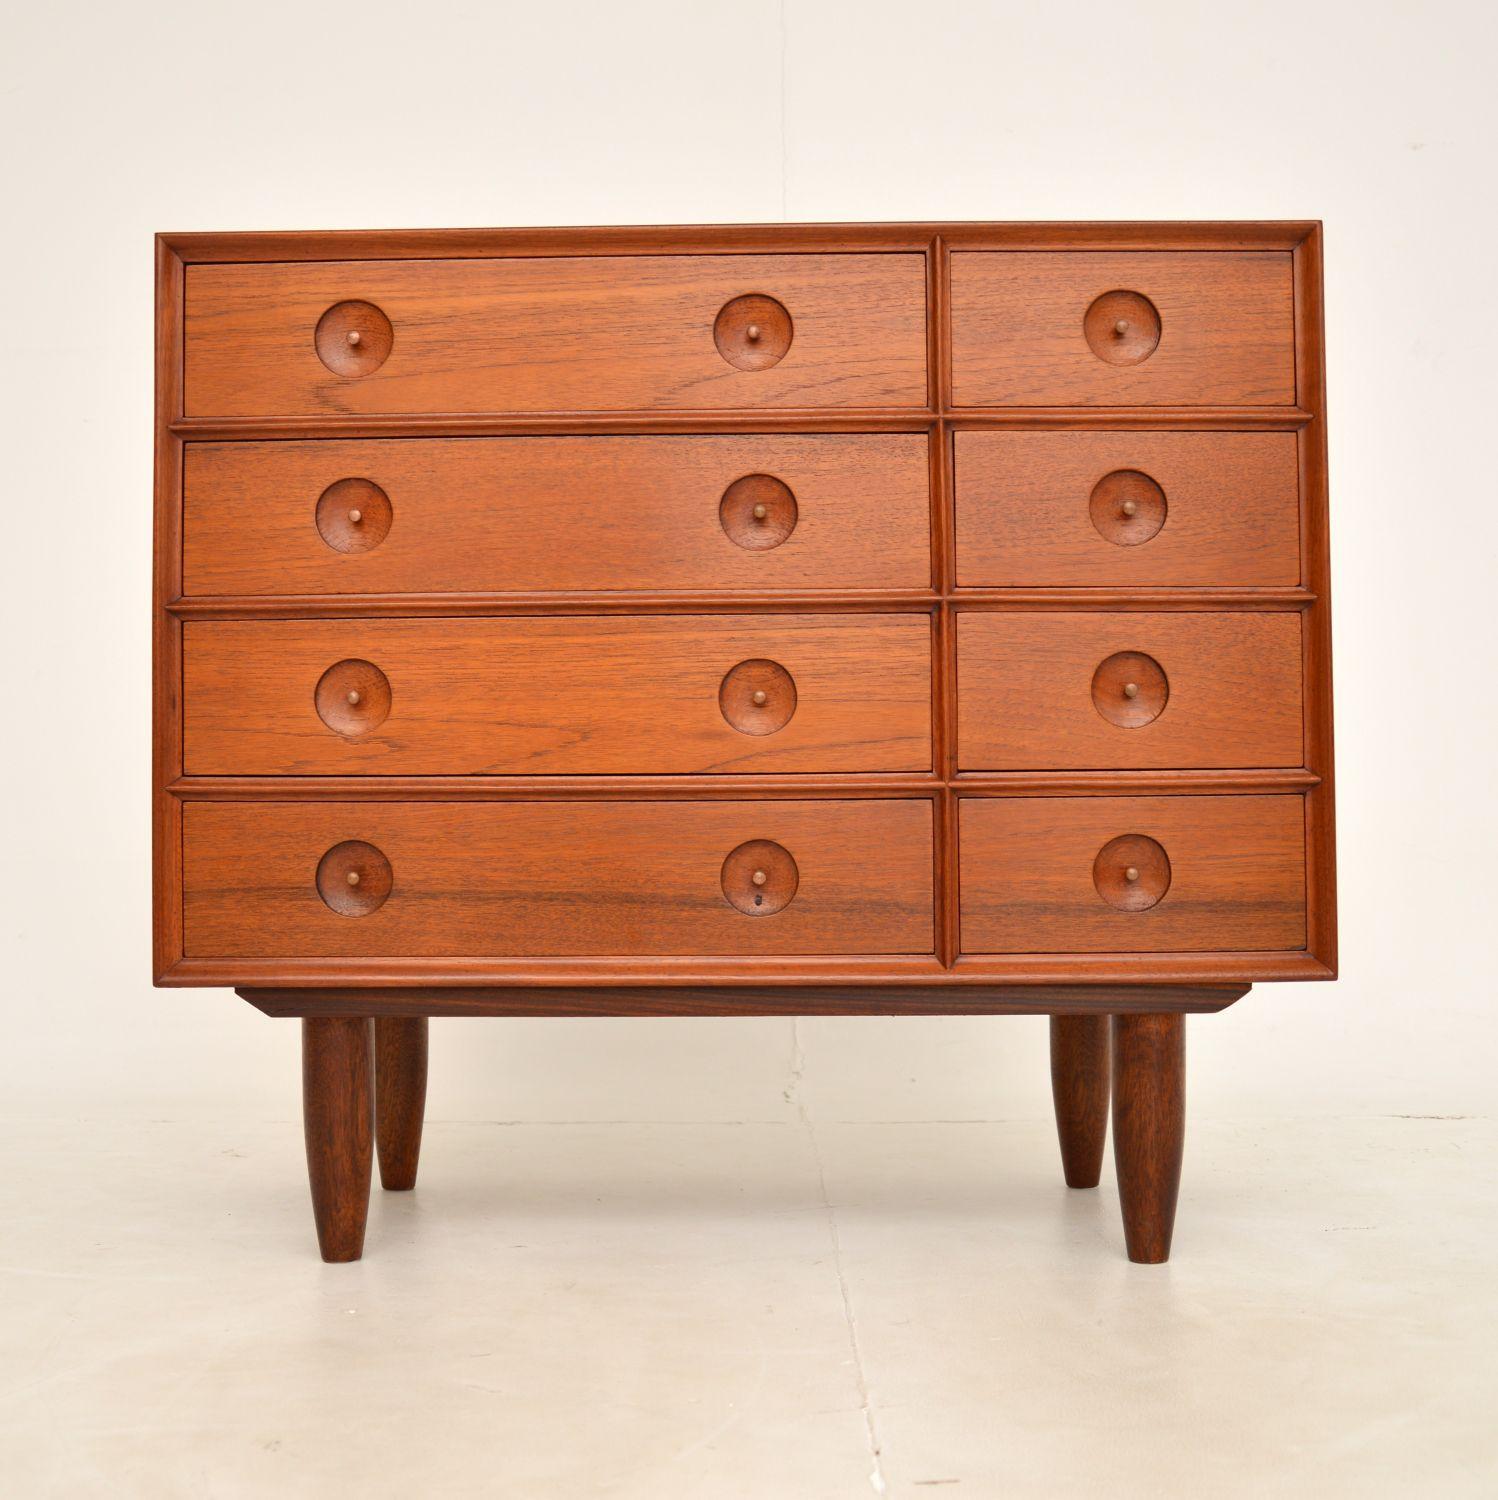 A beautiful and very unusual Danish chest of drawers in teak. This was made in Denmark, it dates from around the 1960’s.

The quality is amazing, this is made completely of solid teak with wood veneers on the top, sides and back. It is extremely